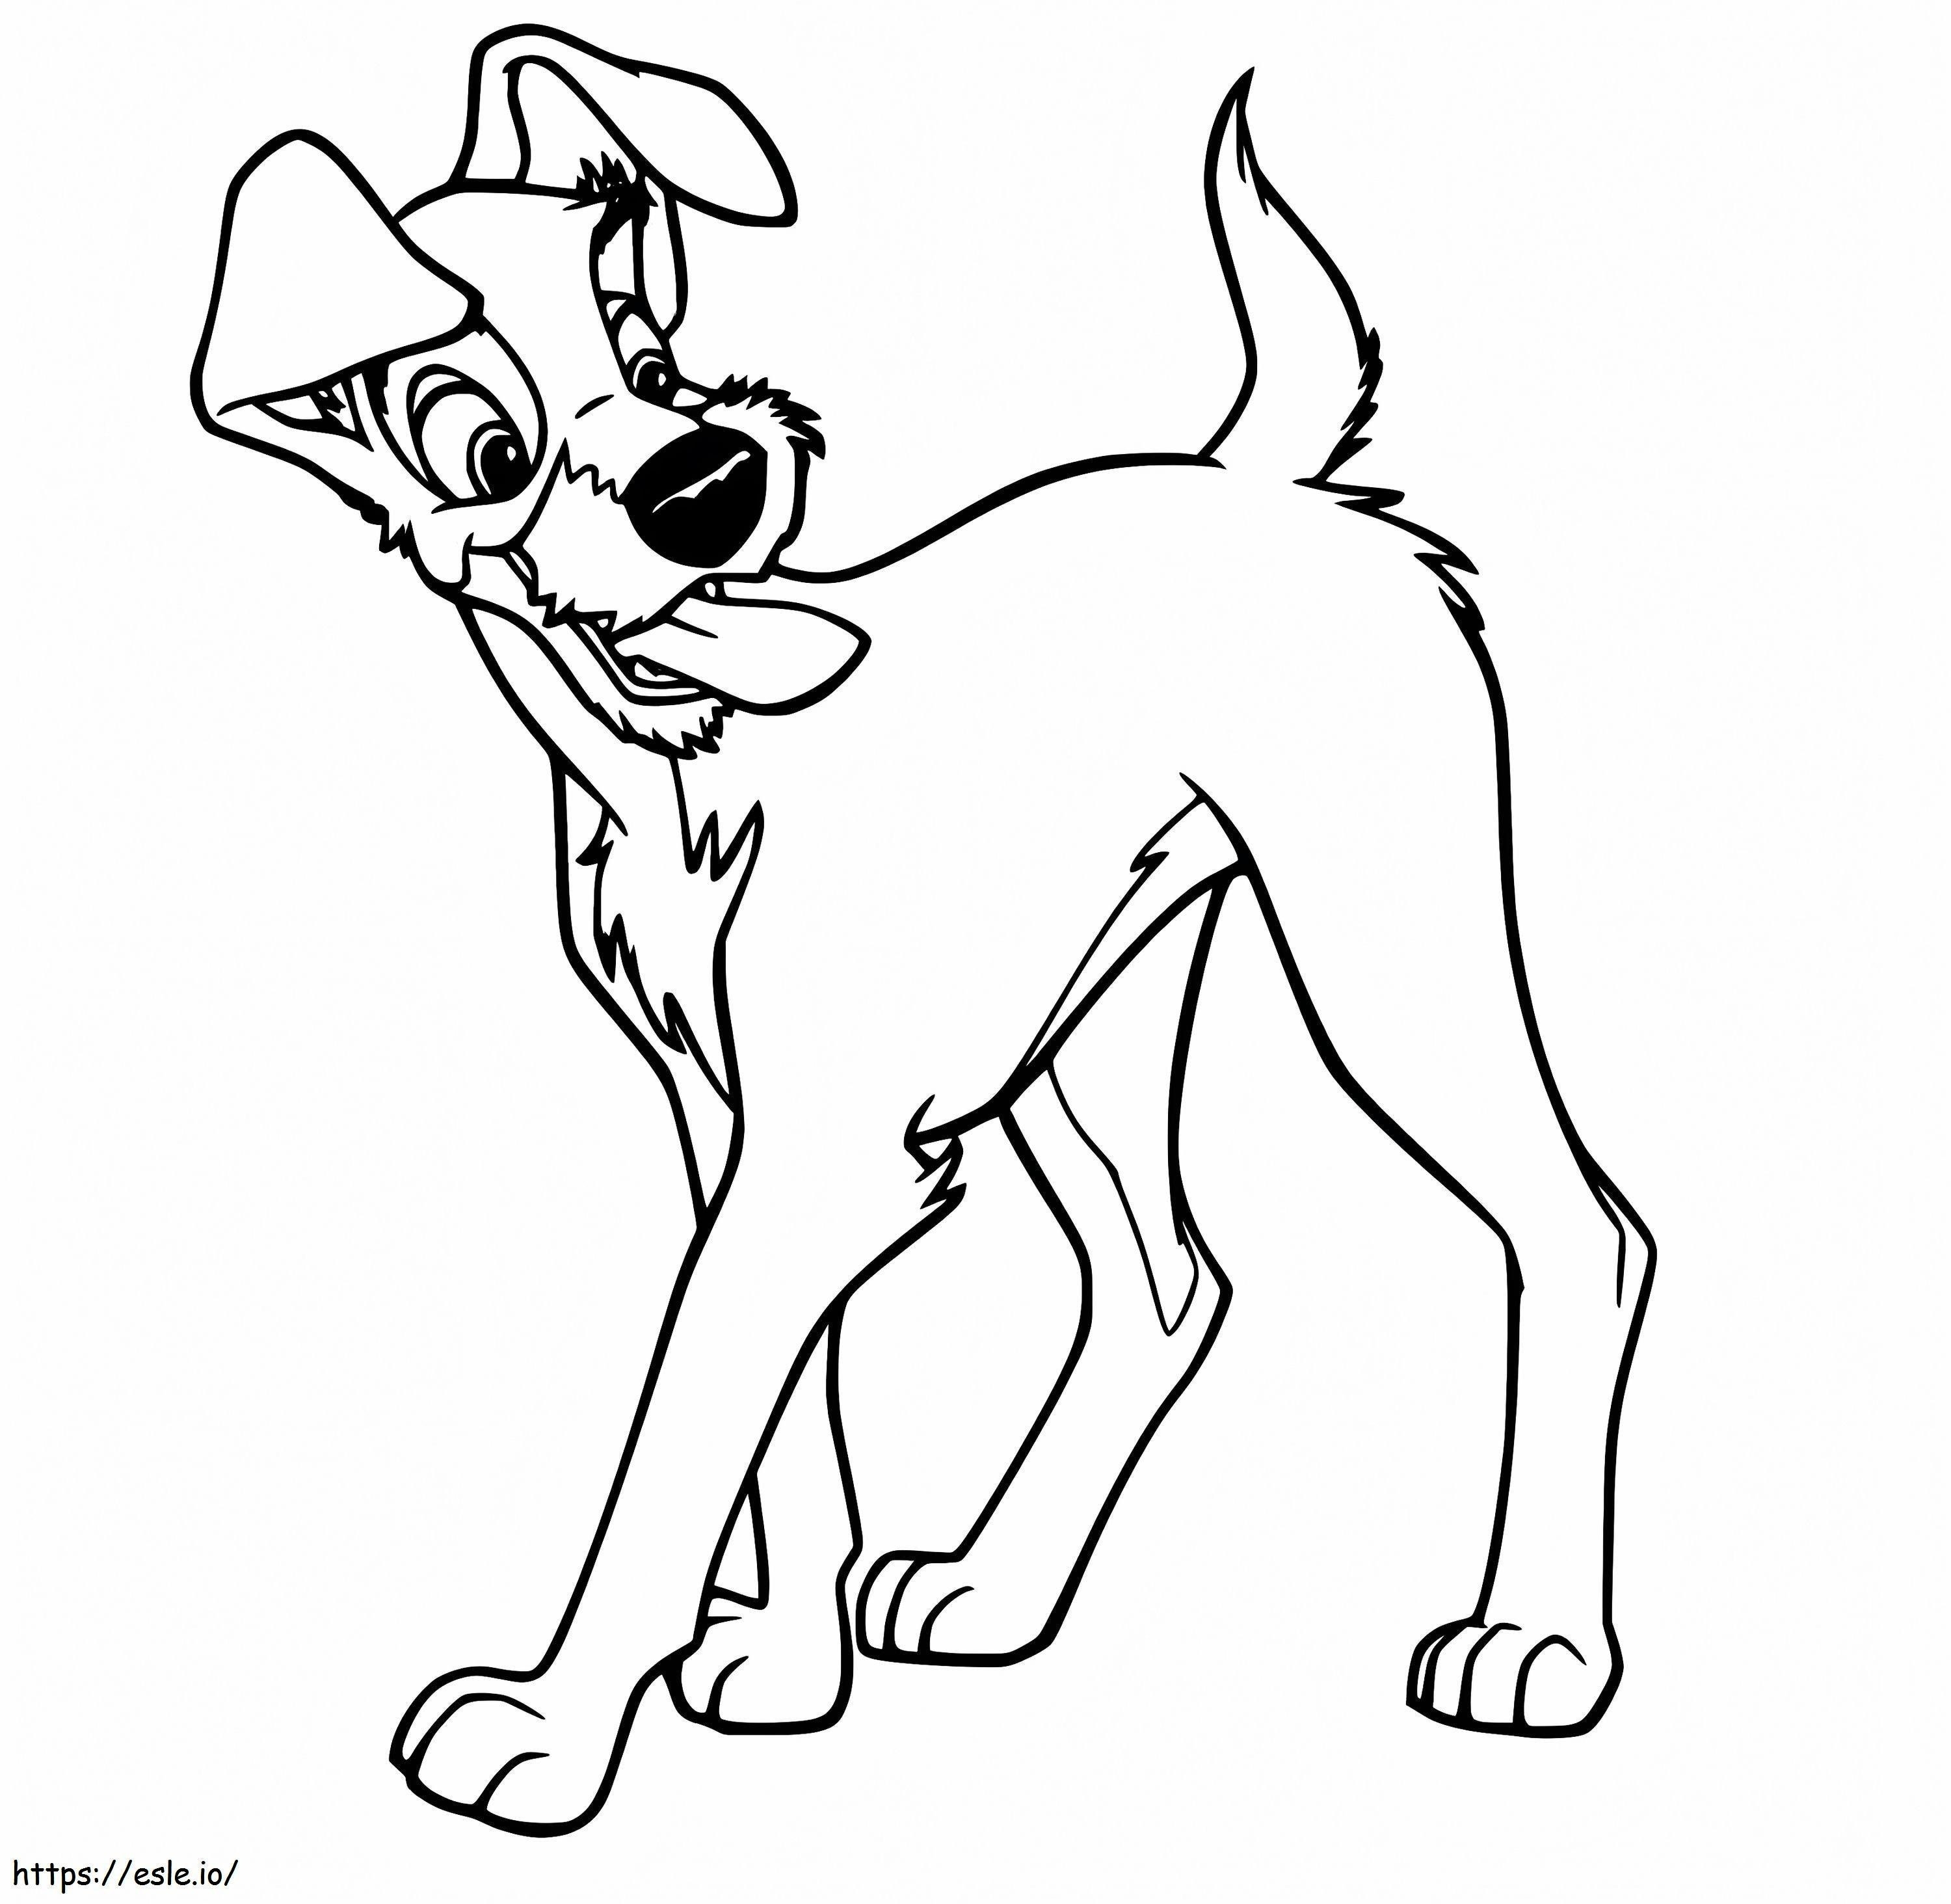 The Tramp Is Smiling coloring page